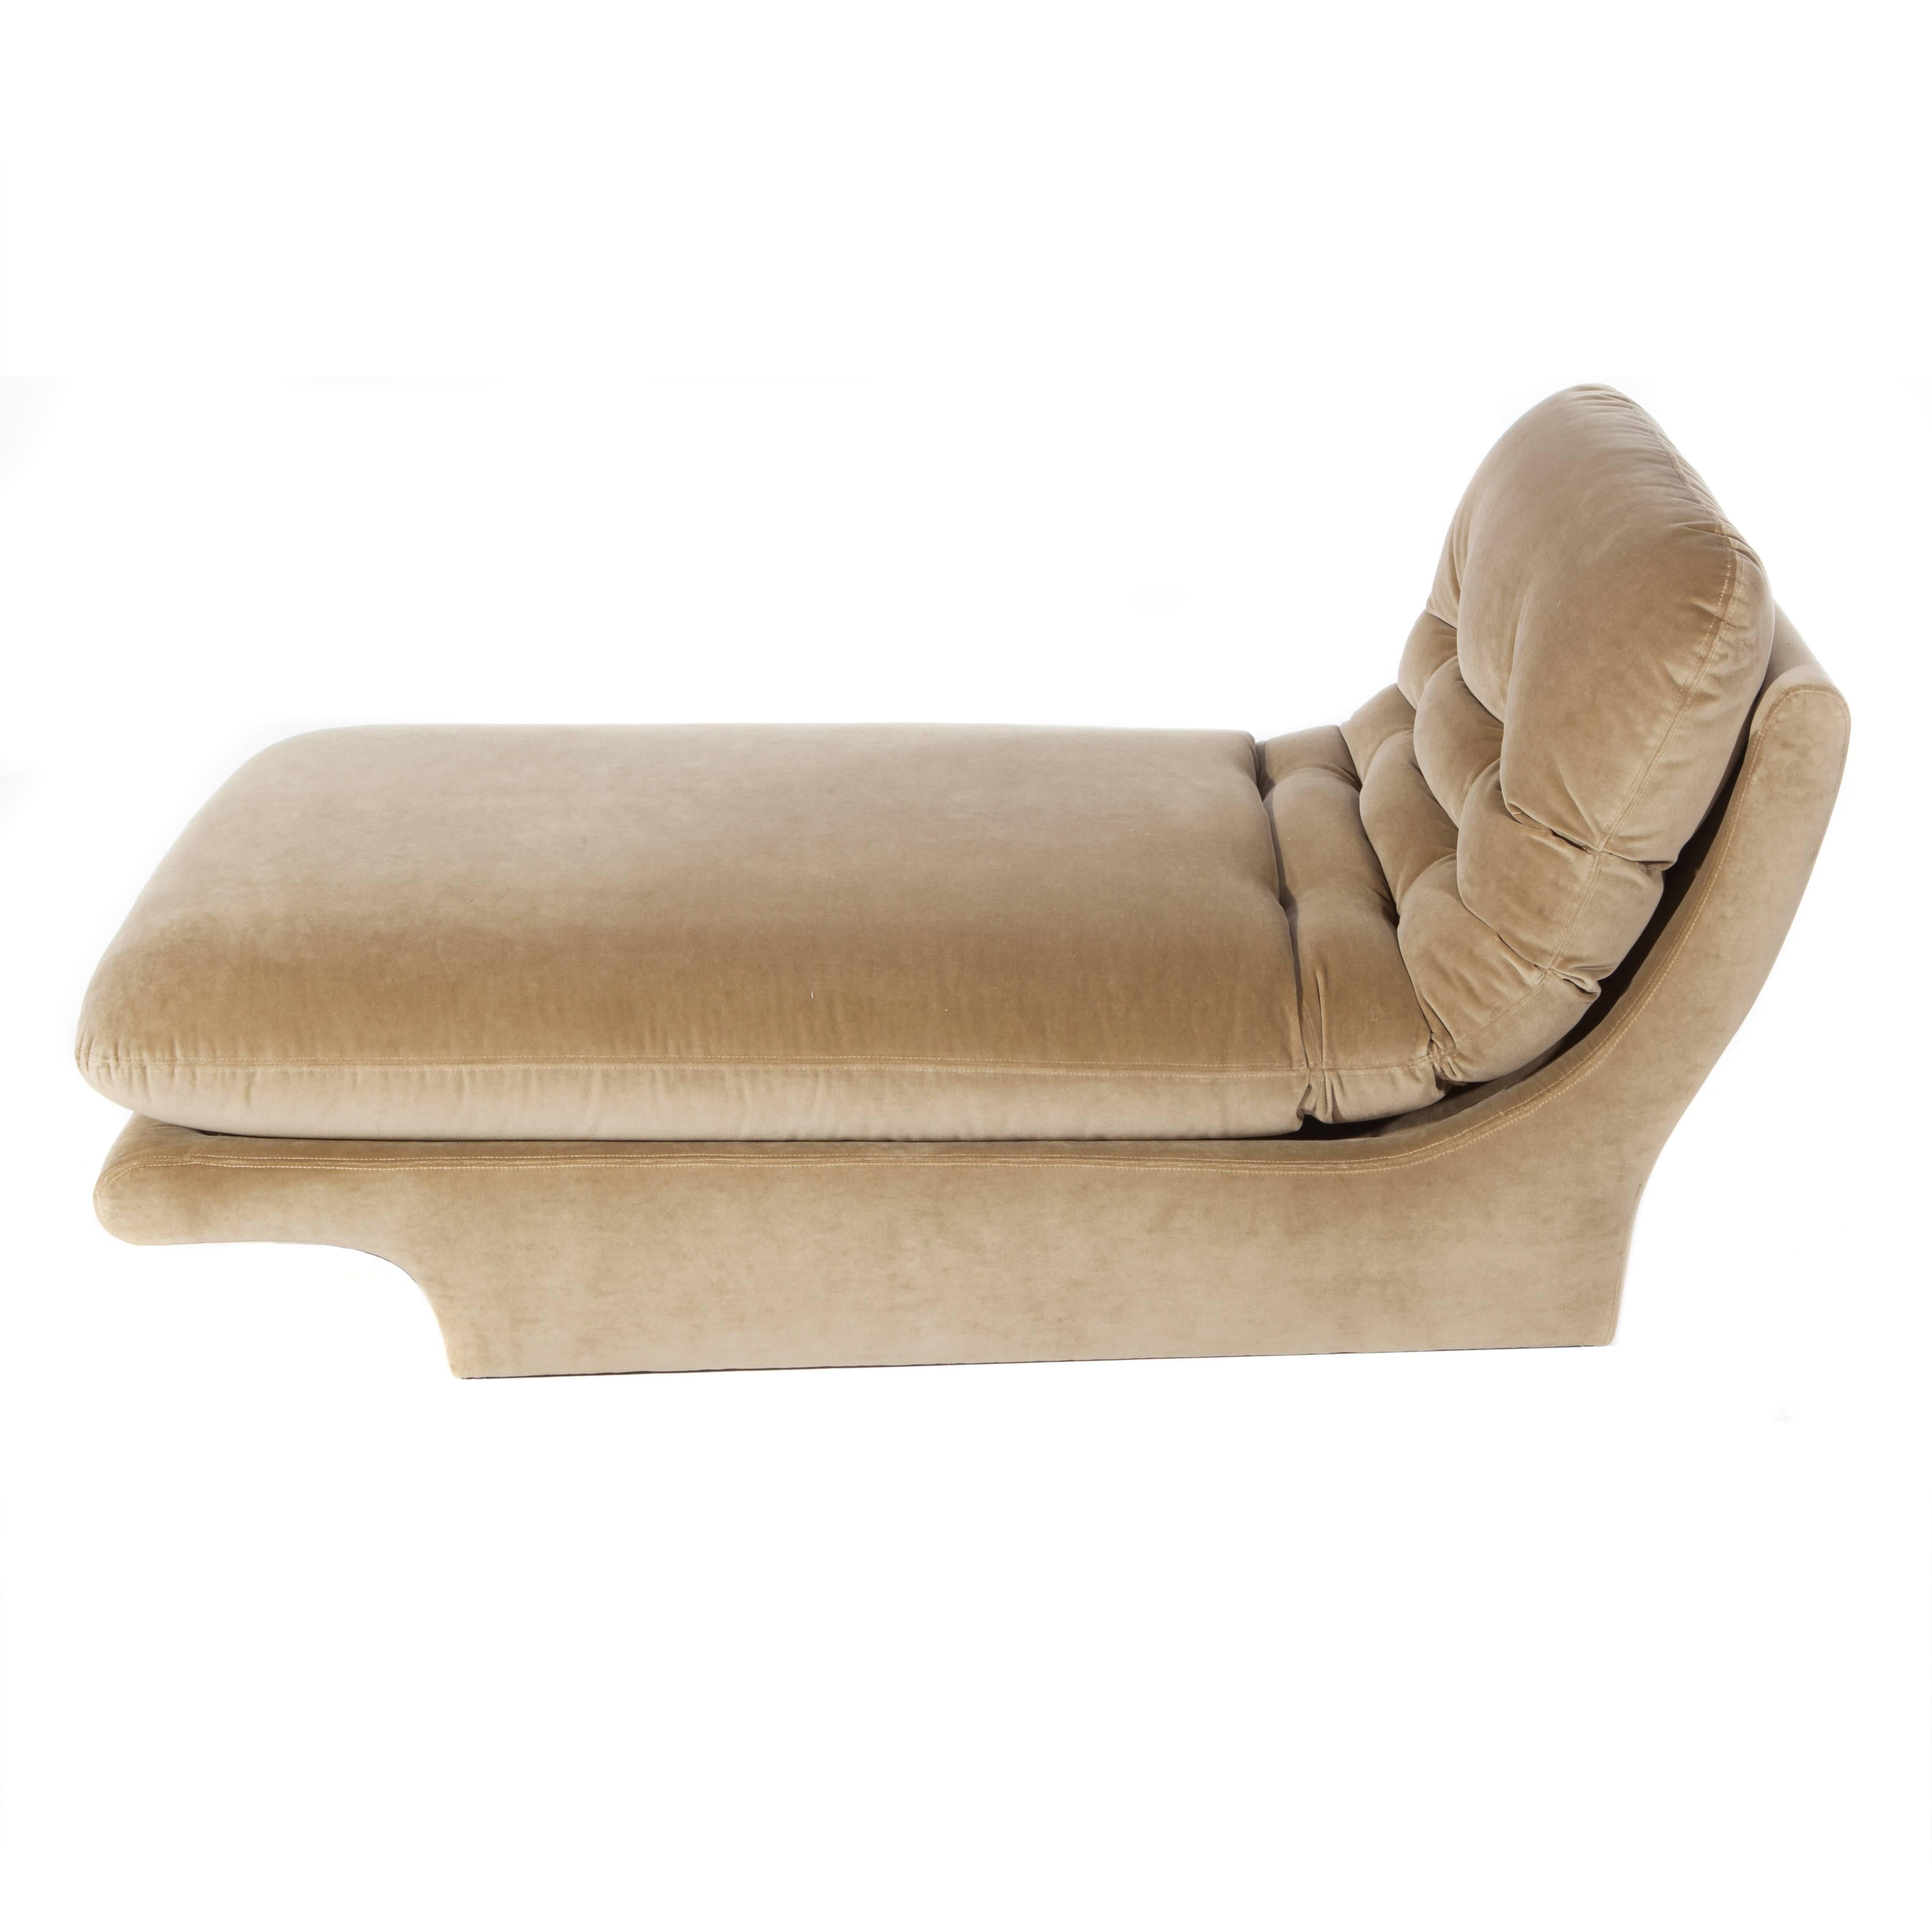 American Fully Upholstered 1970s Chaise Lounge by Preview Furniture